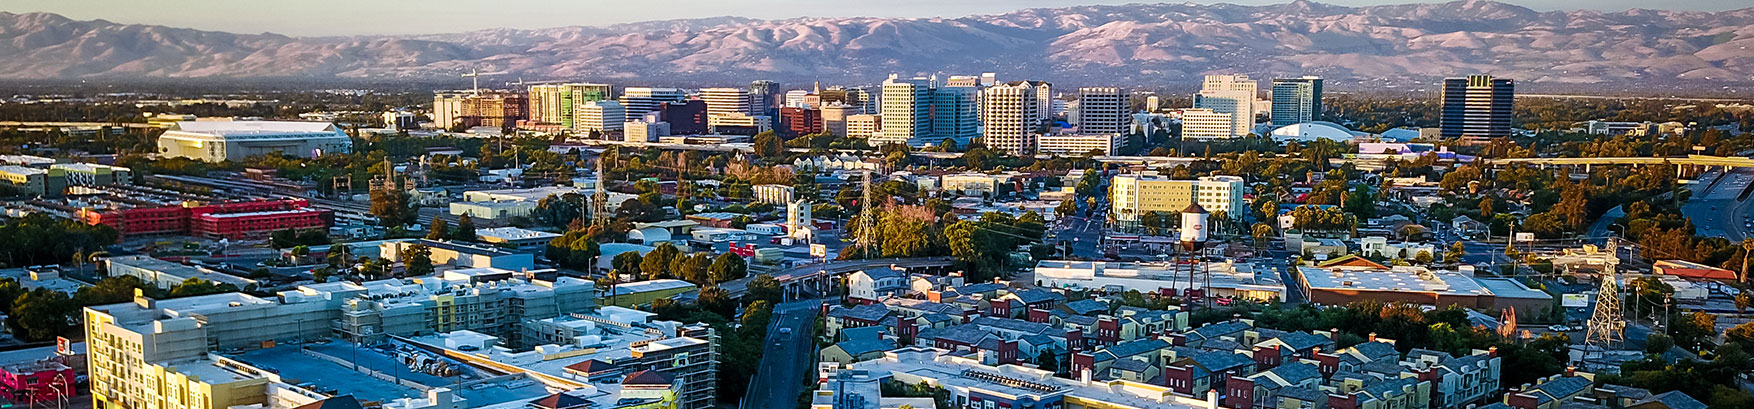 San Jose cityscape - an area served by San Jose car accident lawyer Super Woman Super Lawyer